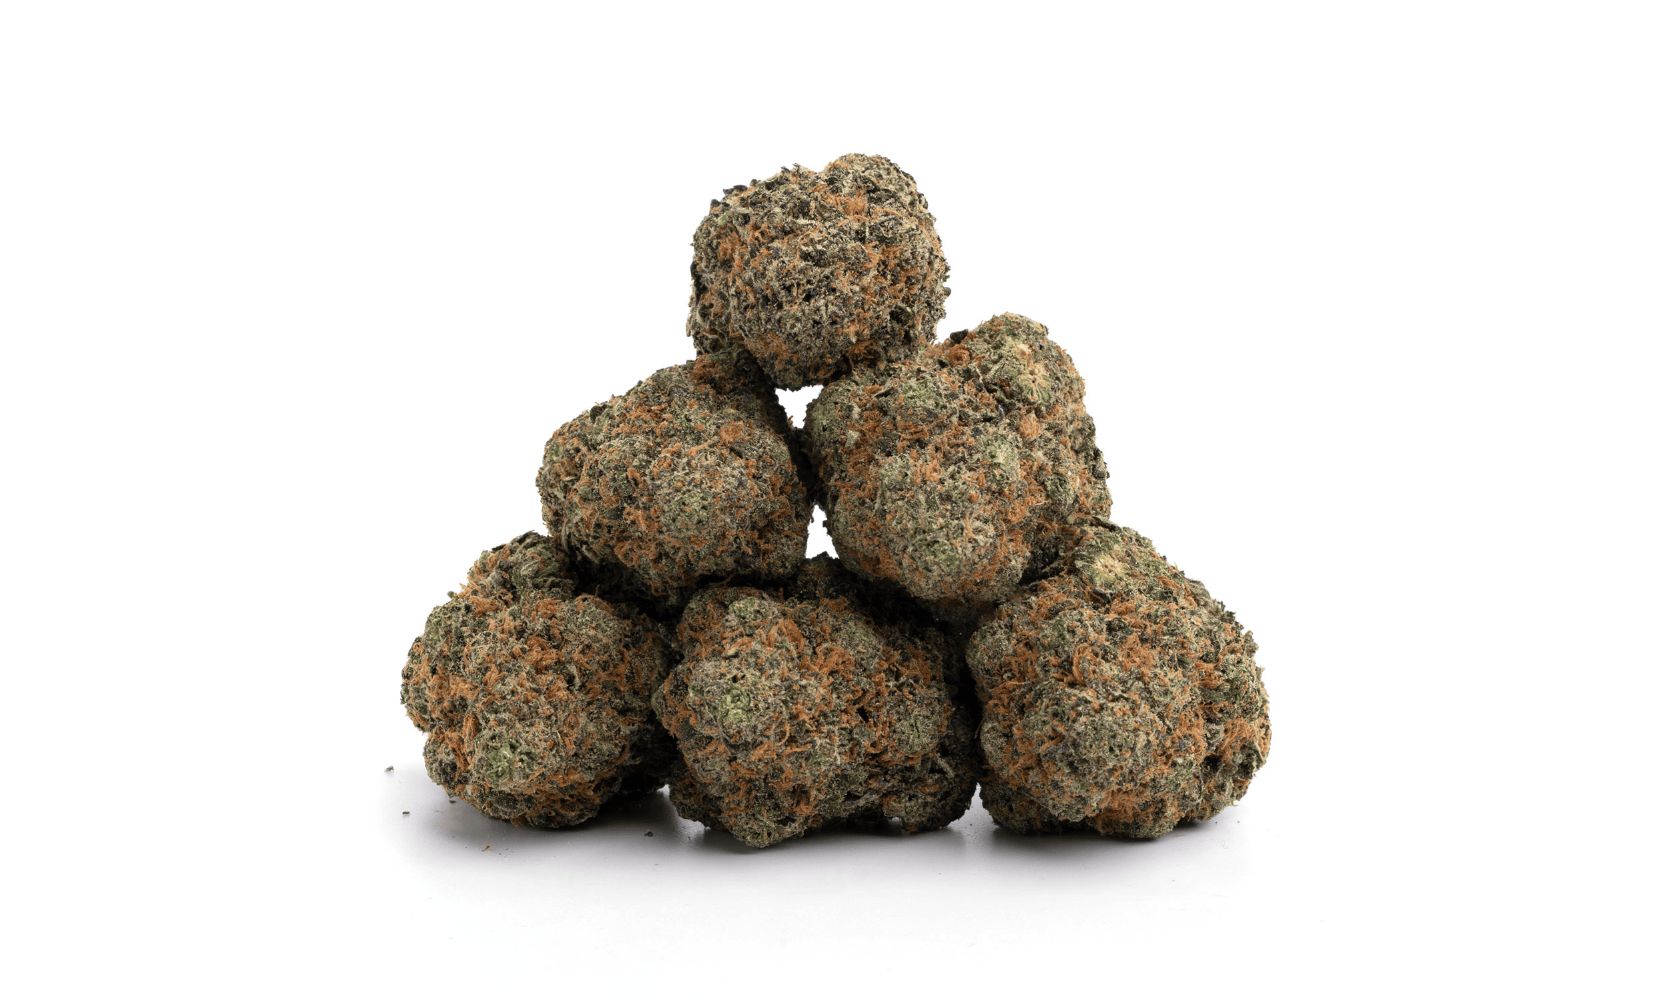 Cherry Pie strain is one of the best-tasting cannabis buds today. Here’s the full Cherry Pie weed review to help you decide when buying weed online in Canada